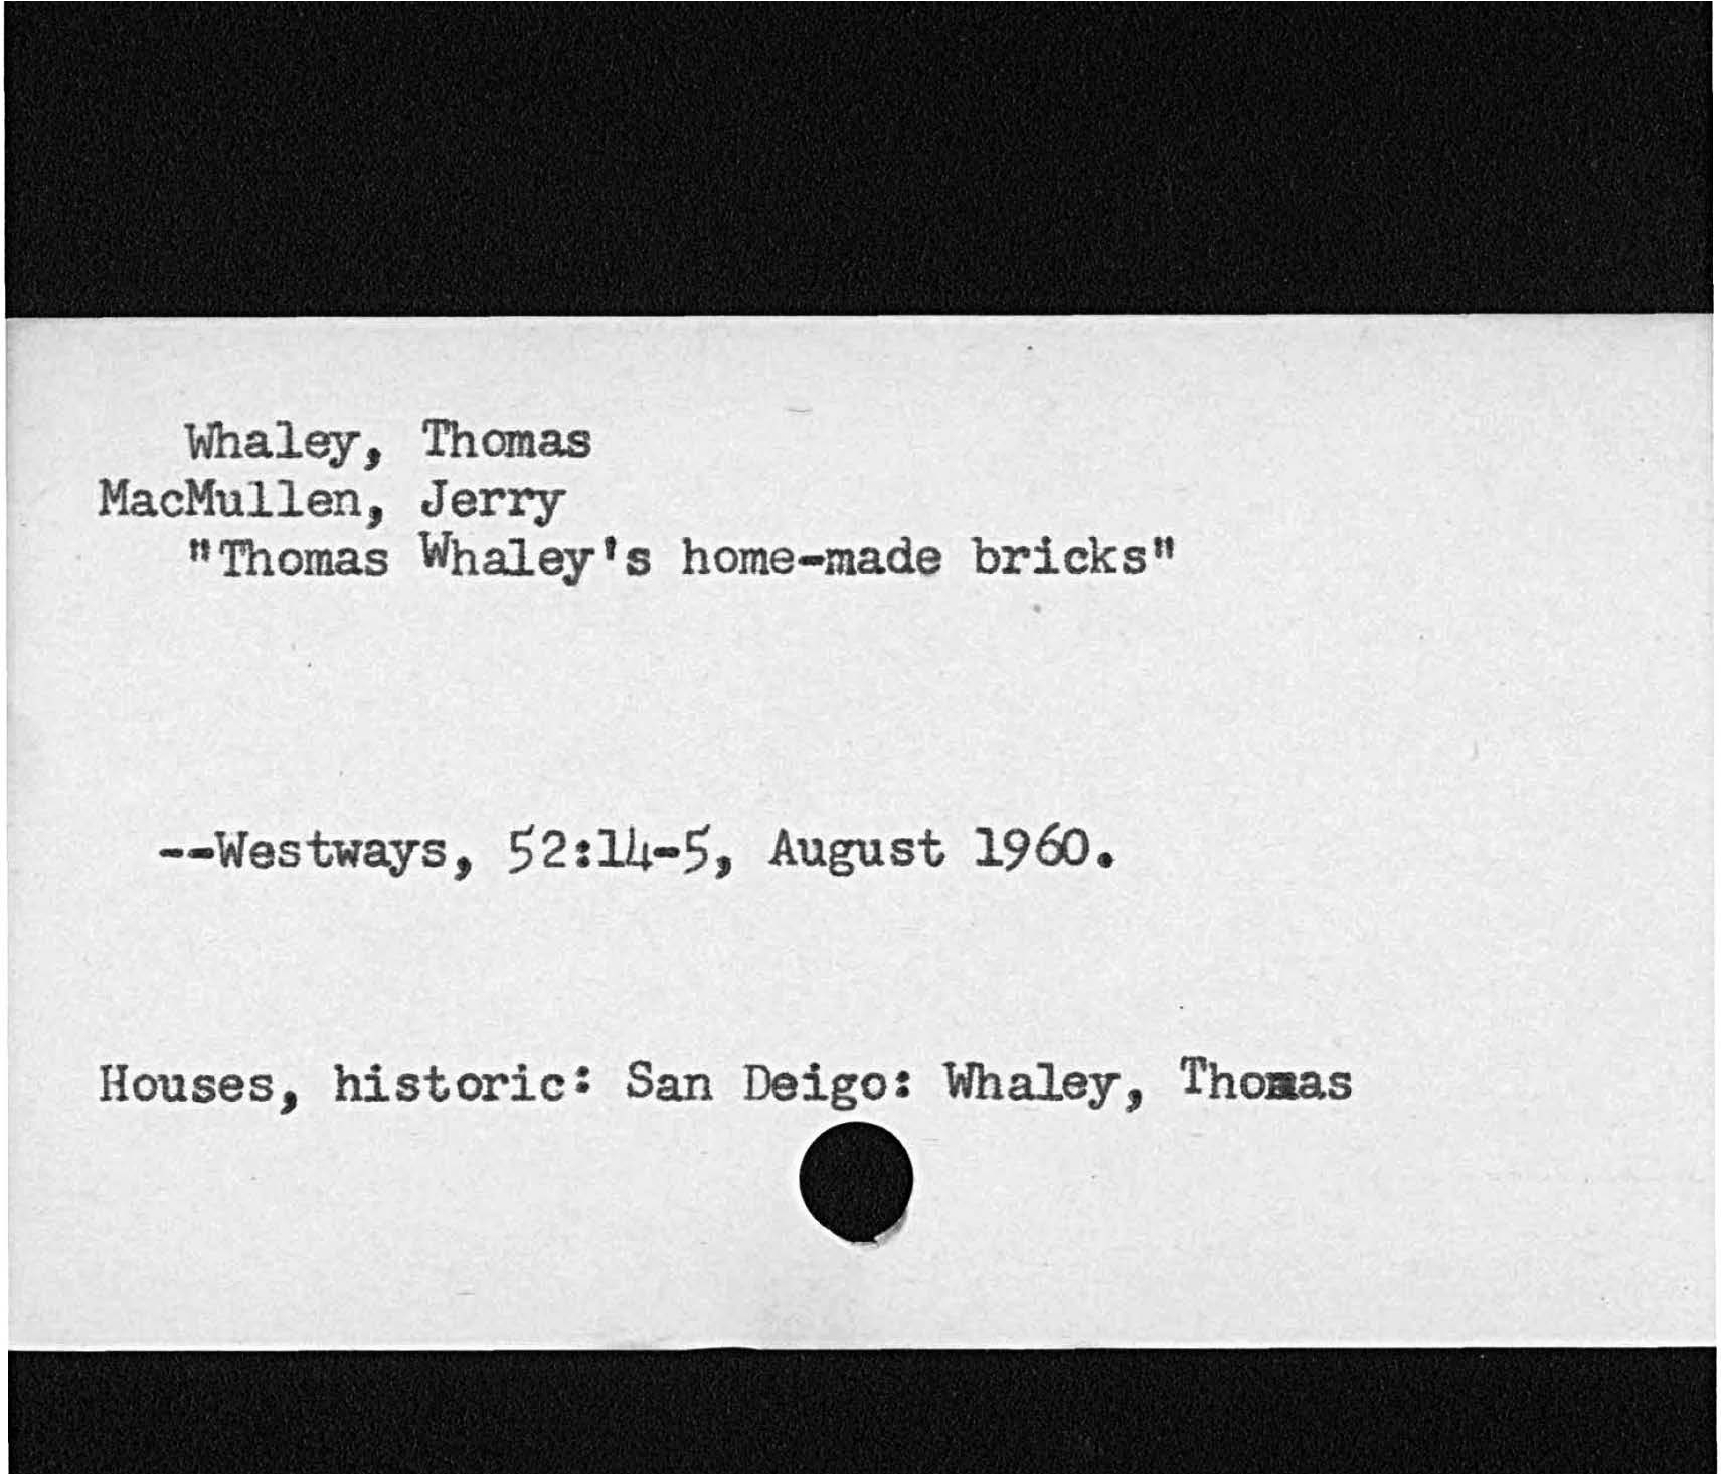 Whaley, ThomasMcMullen JeffersonThomas Whaley's home- made bricksWestways, 52:  14- 5, August 19tA.Houses, historic:  San Diego Whaley, Thomas